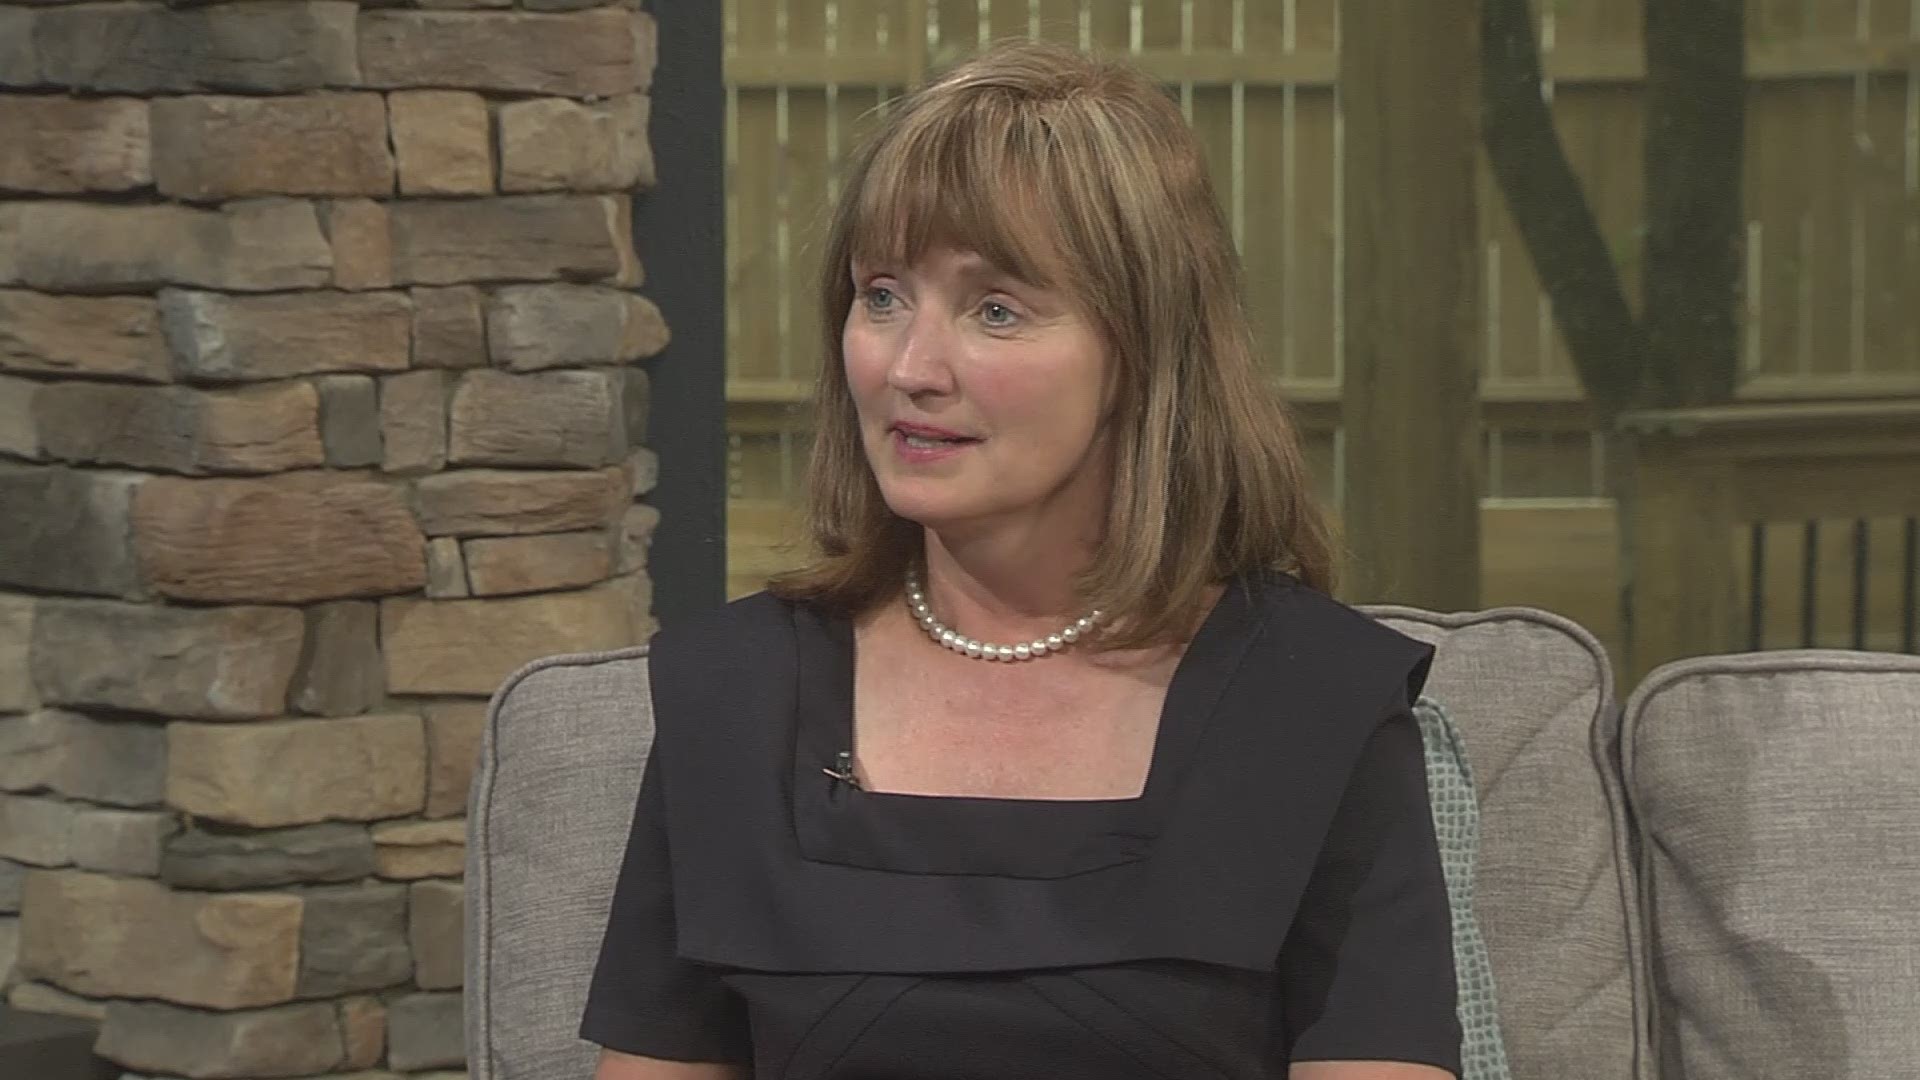 Speaker of the Tennessee House of Representatives Beth Harwell discusses her run for governor.